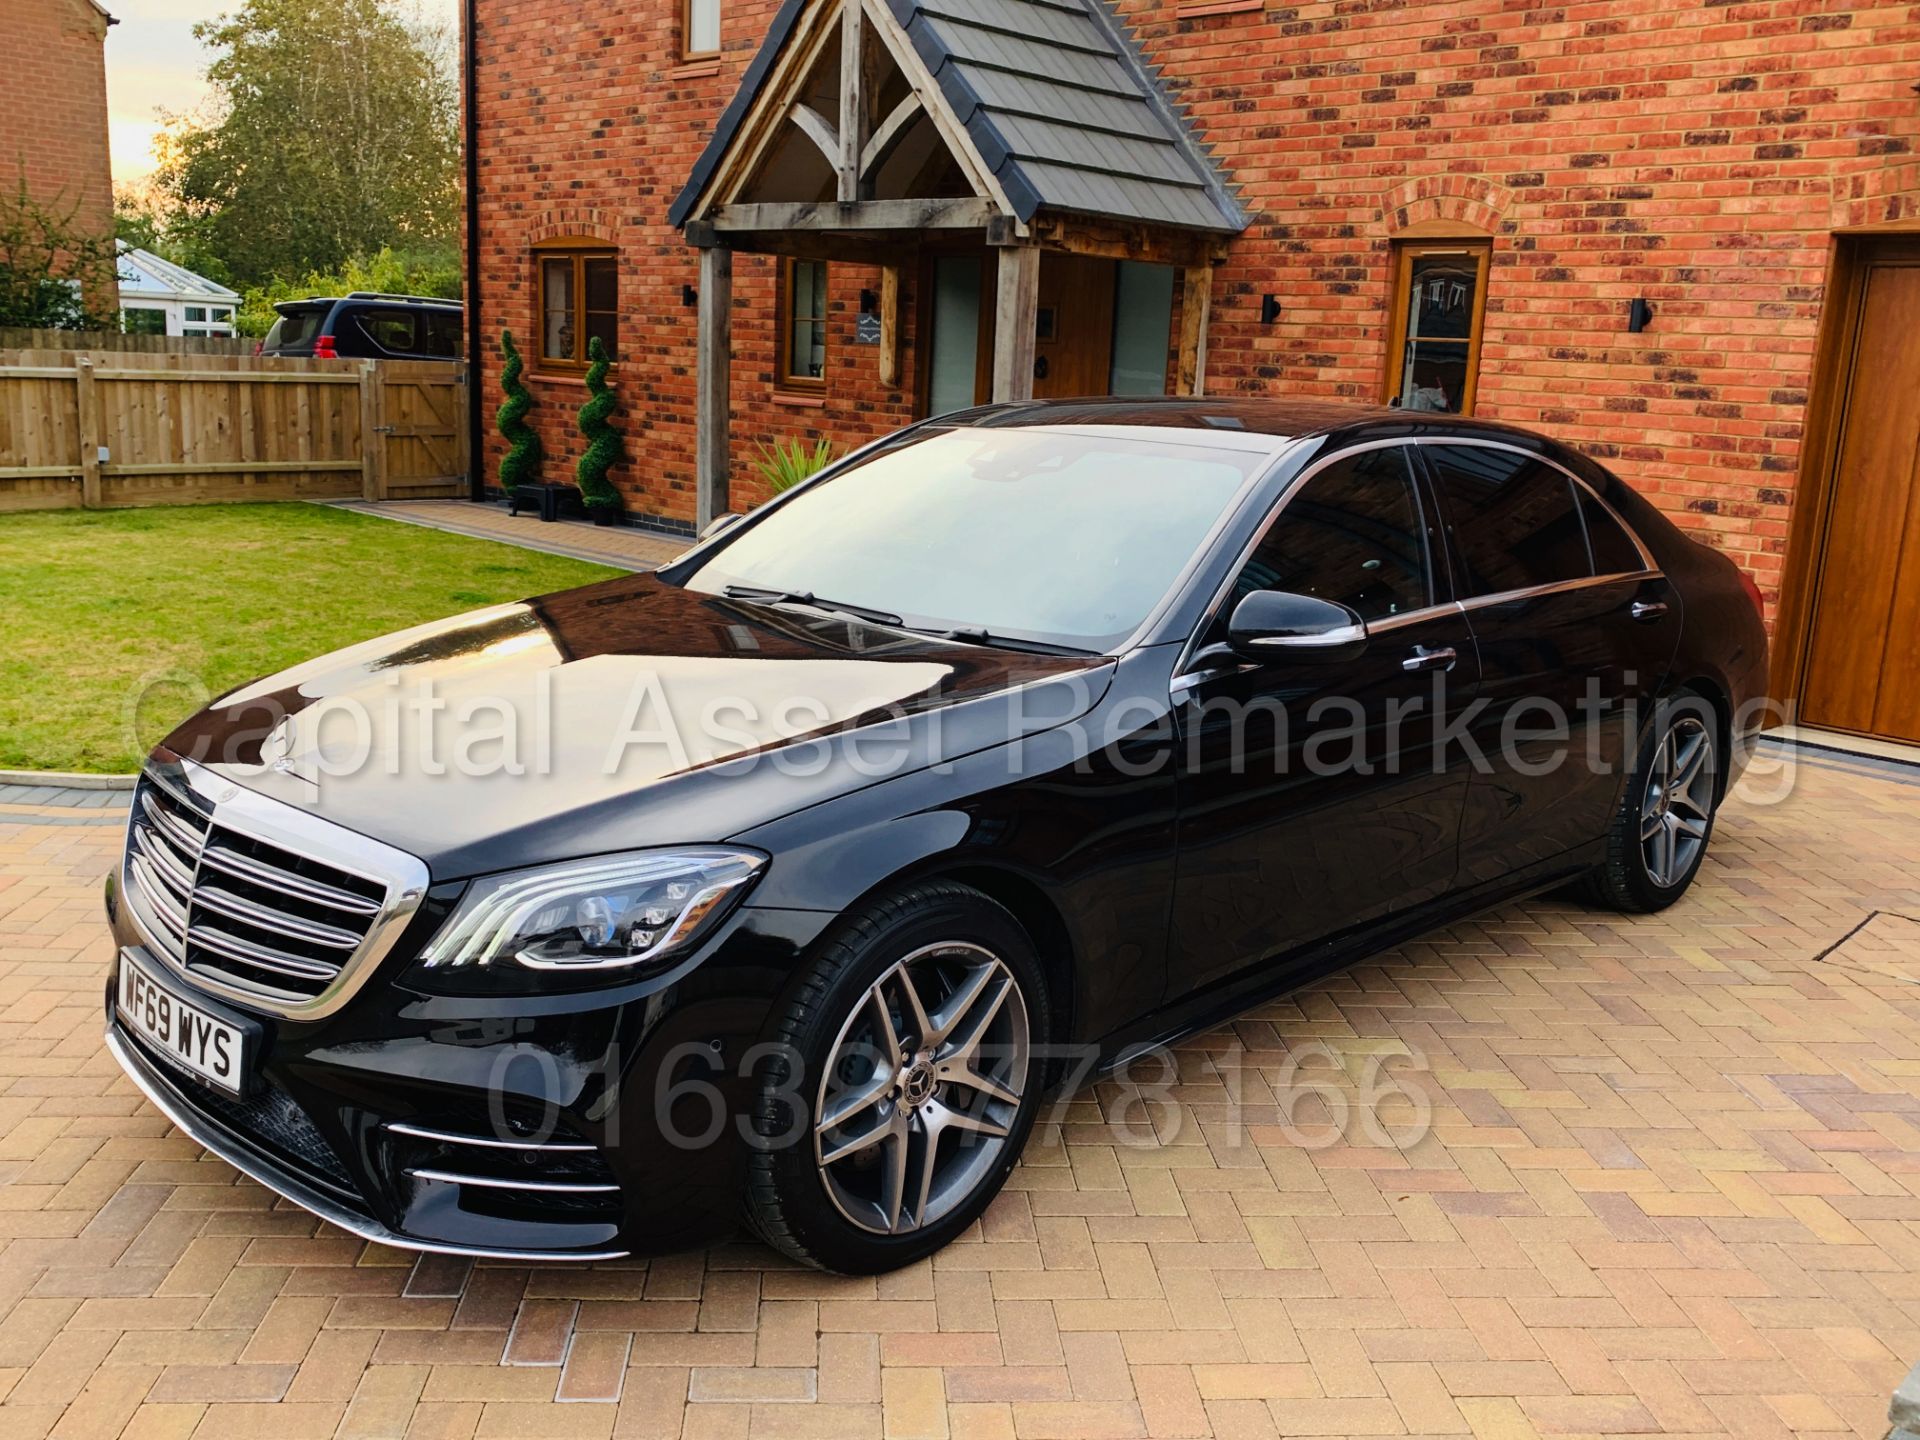 (On Sale) MERCEDES-BENZ S350d LWB *AMG - LUXURY SALOON* (69 REG) 9-G TRONIC AUTO *TOP OF THE RANGE* - Image 8 of 66